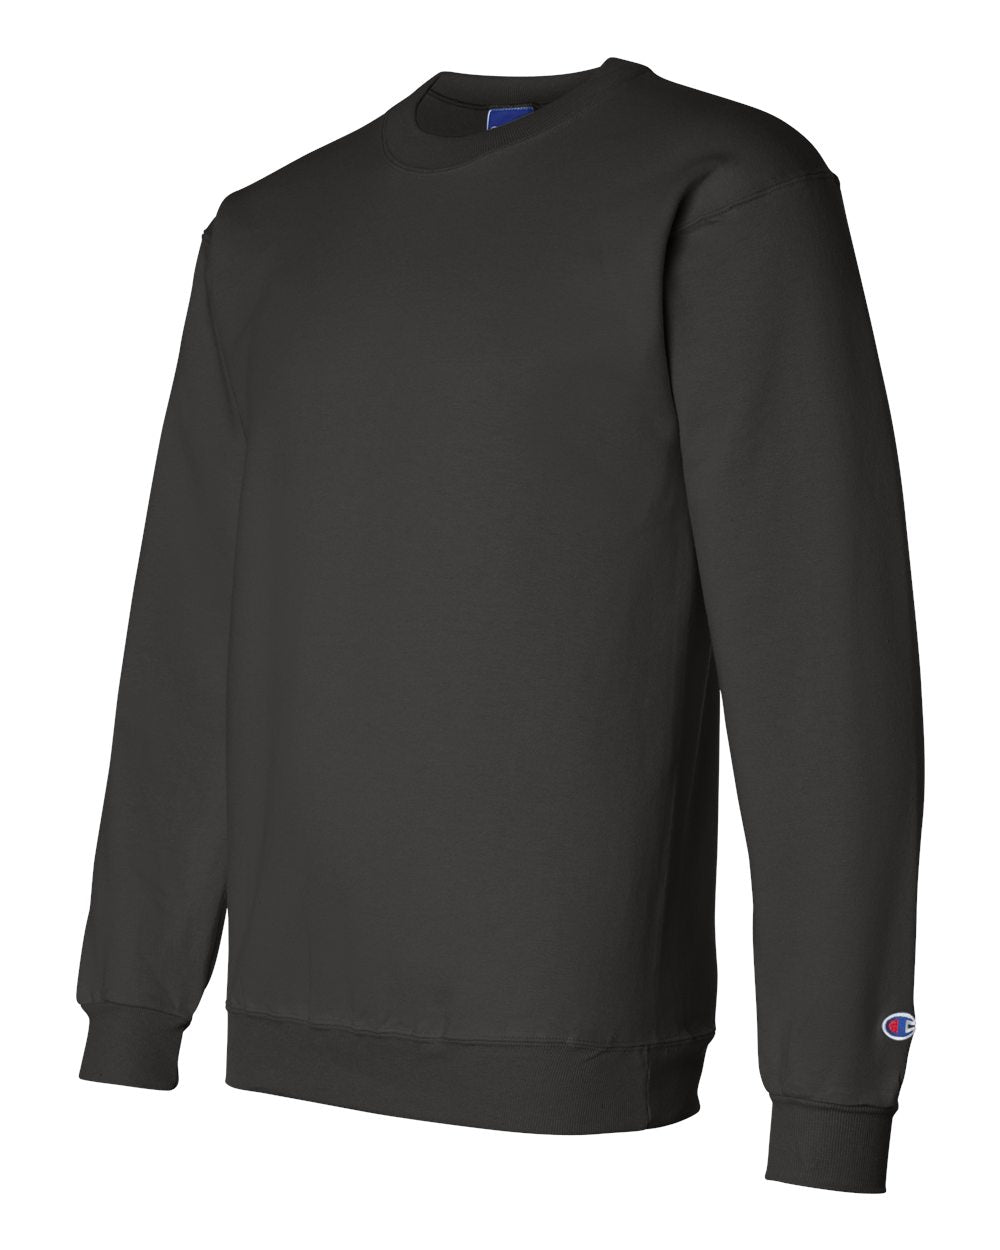 fully customizable champion power blend crewneck sweater for your brand in multiple colors